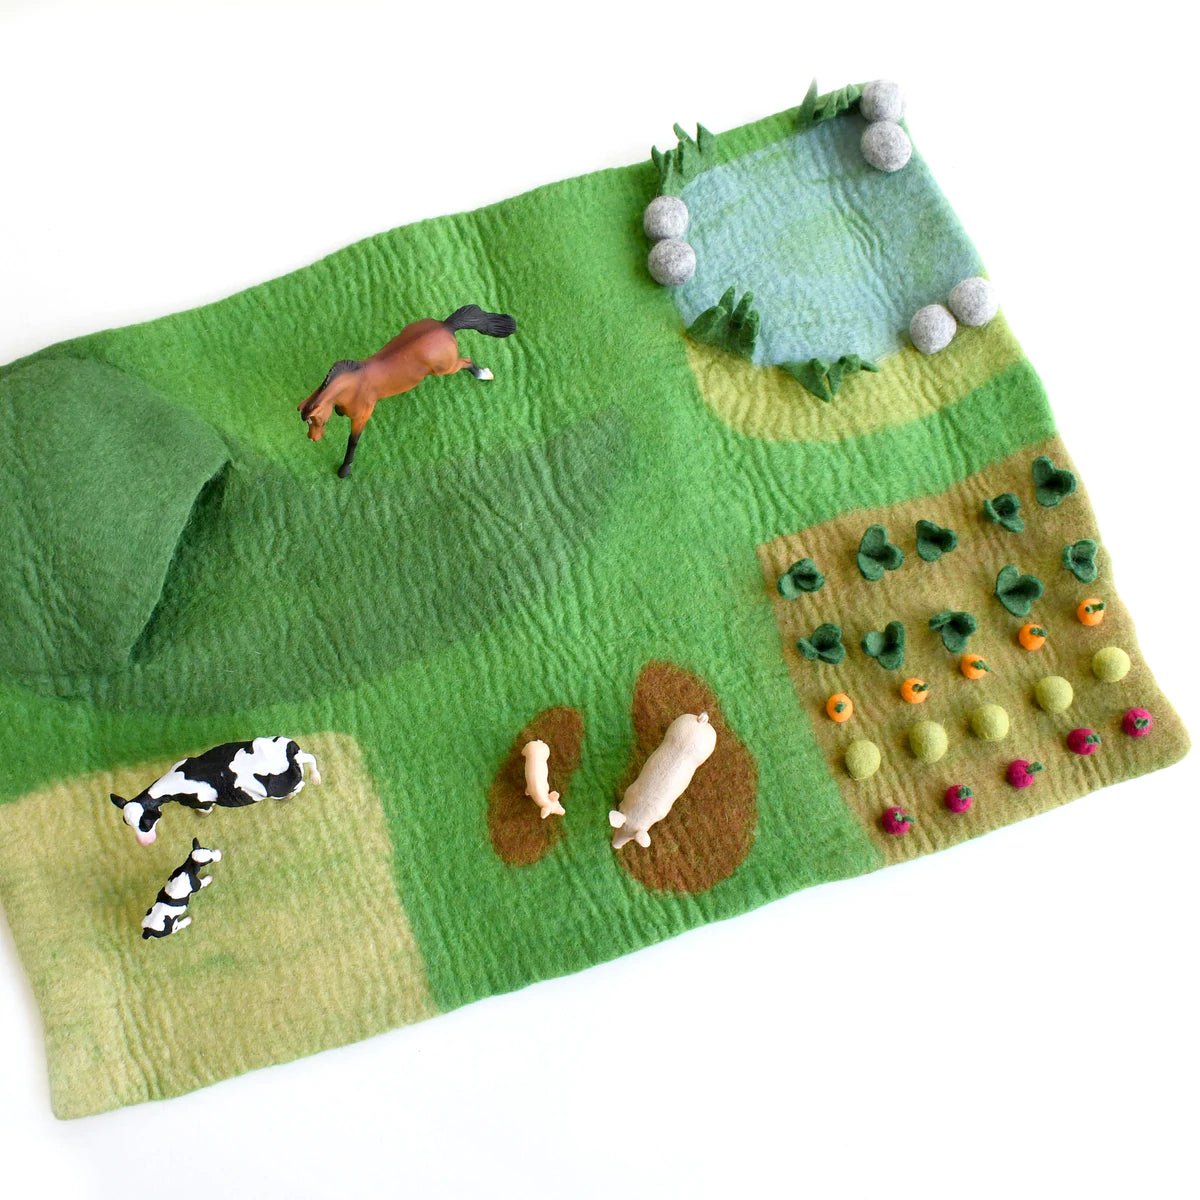 LARGE FARM FELT PLAY MAT PLAYSCAPE by TARA TREASURES - The Playful Collective